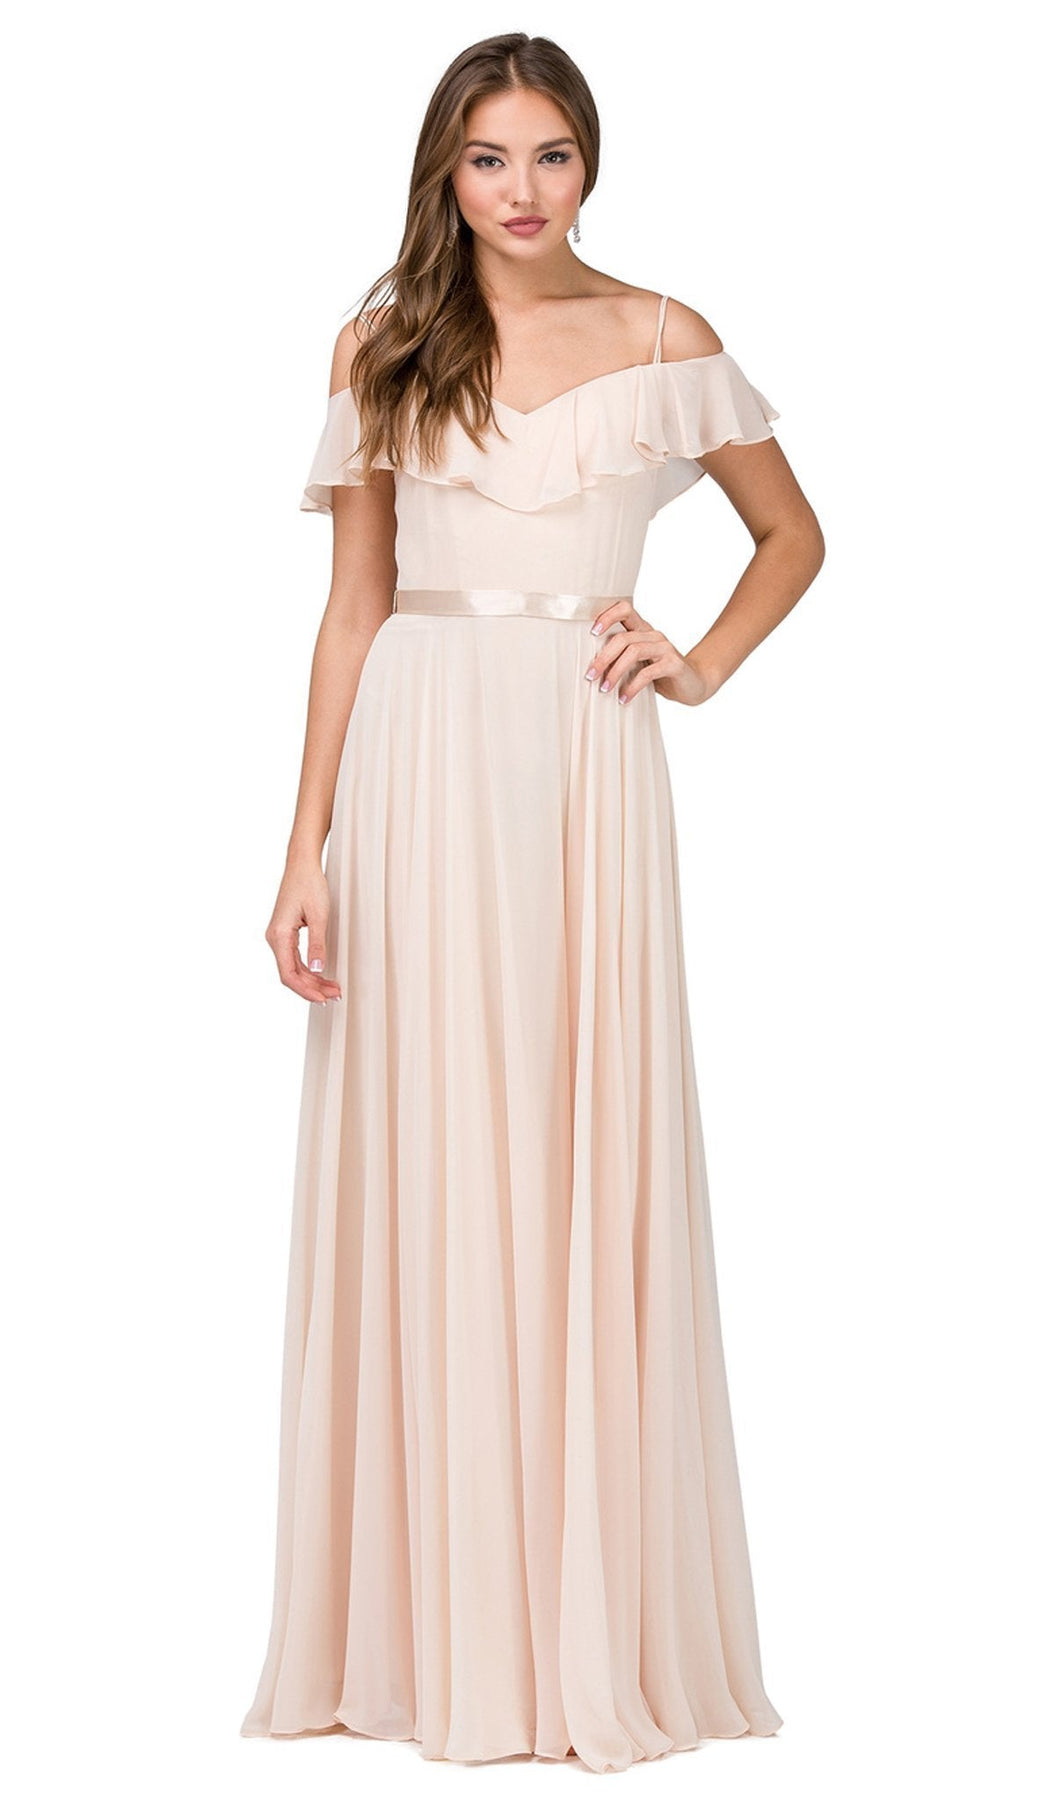 Dancing Queen - 2377 Ruffled Off-Shoulder Chiffon Prom Dress Special Occasion Dress XS / Champagne